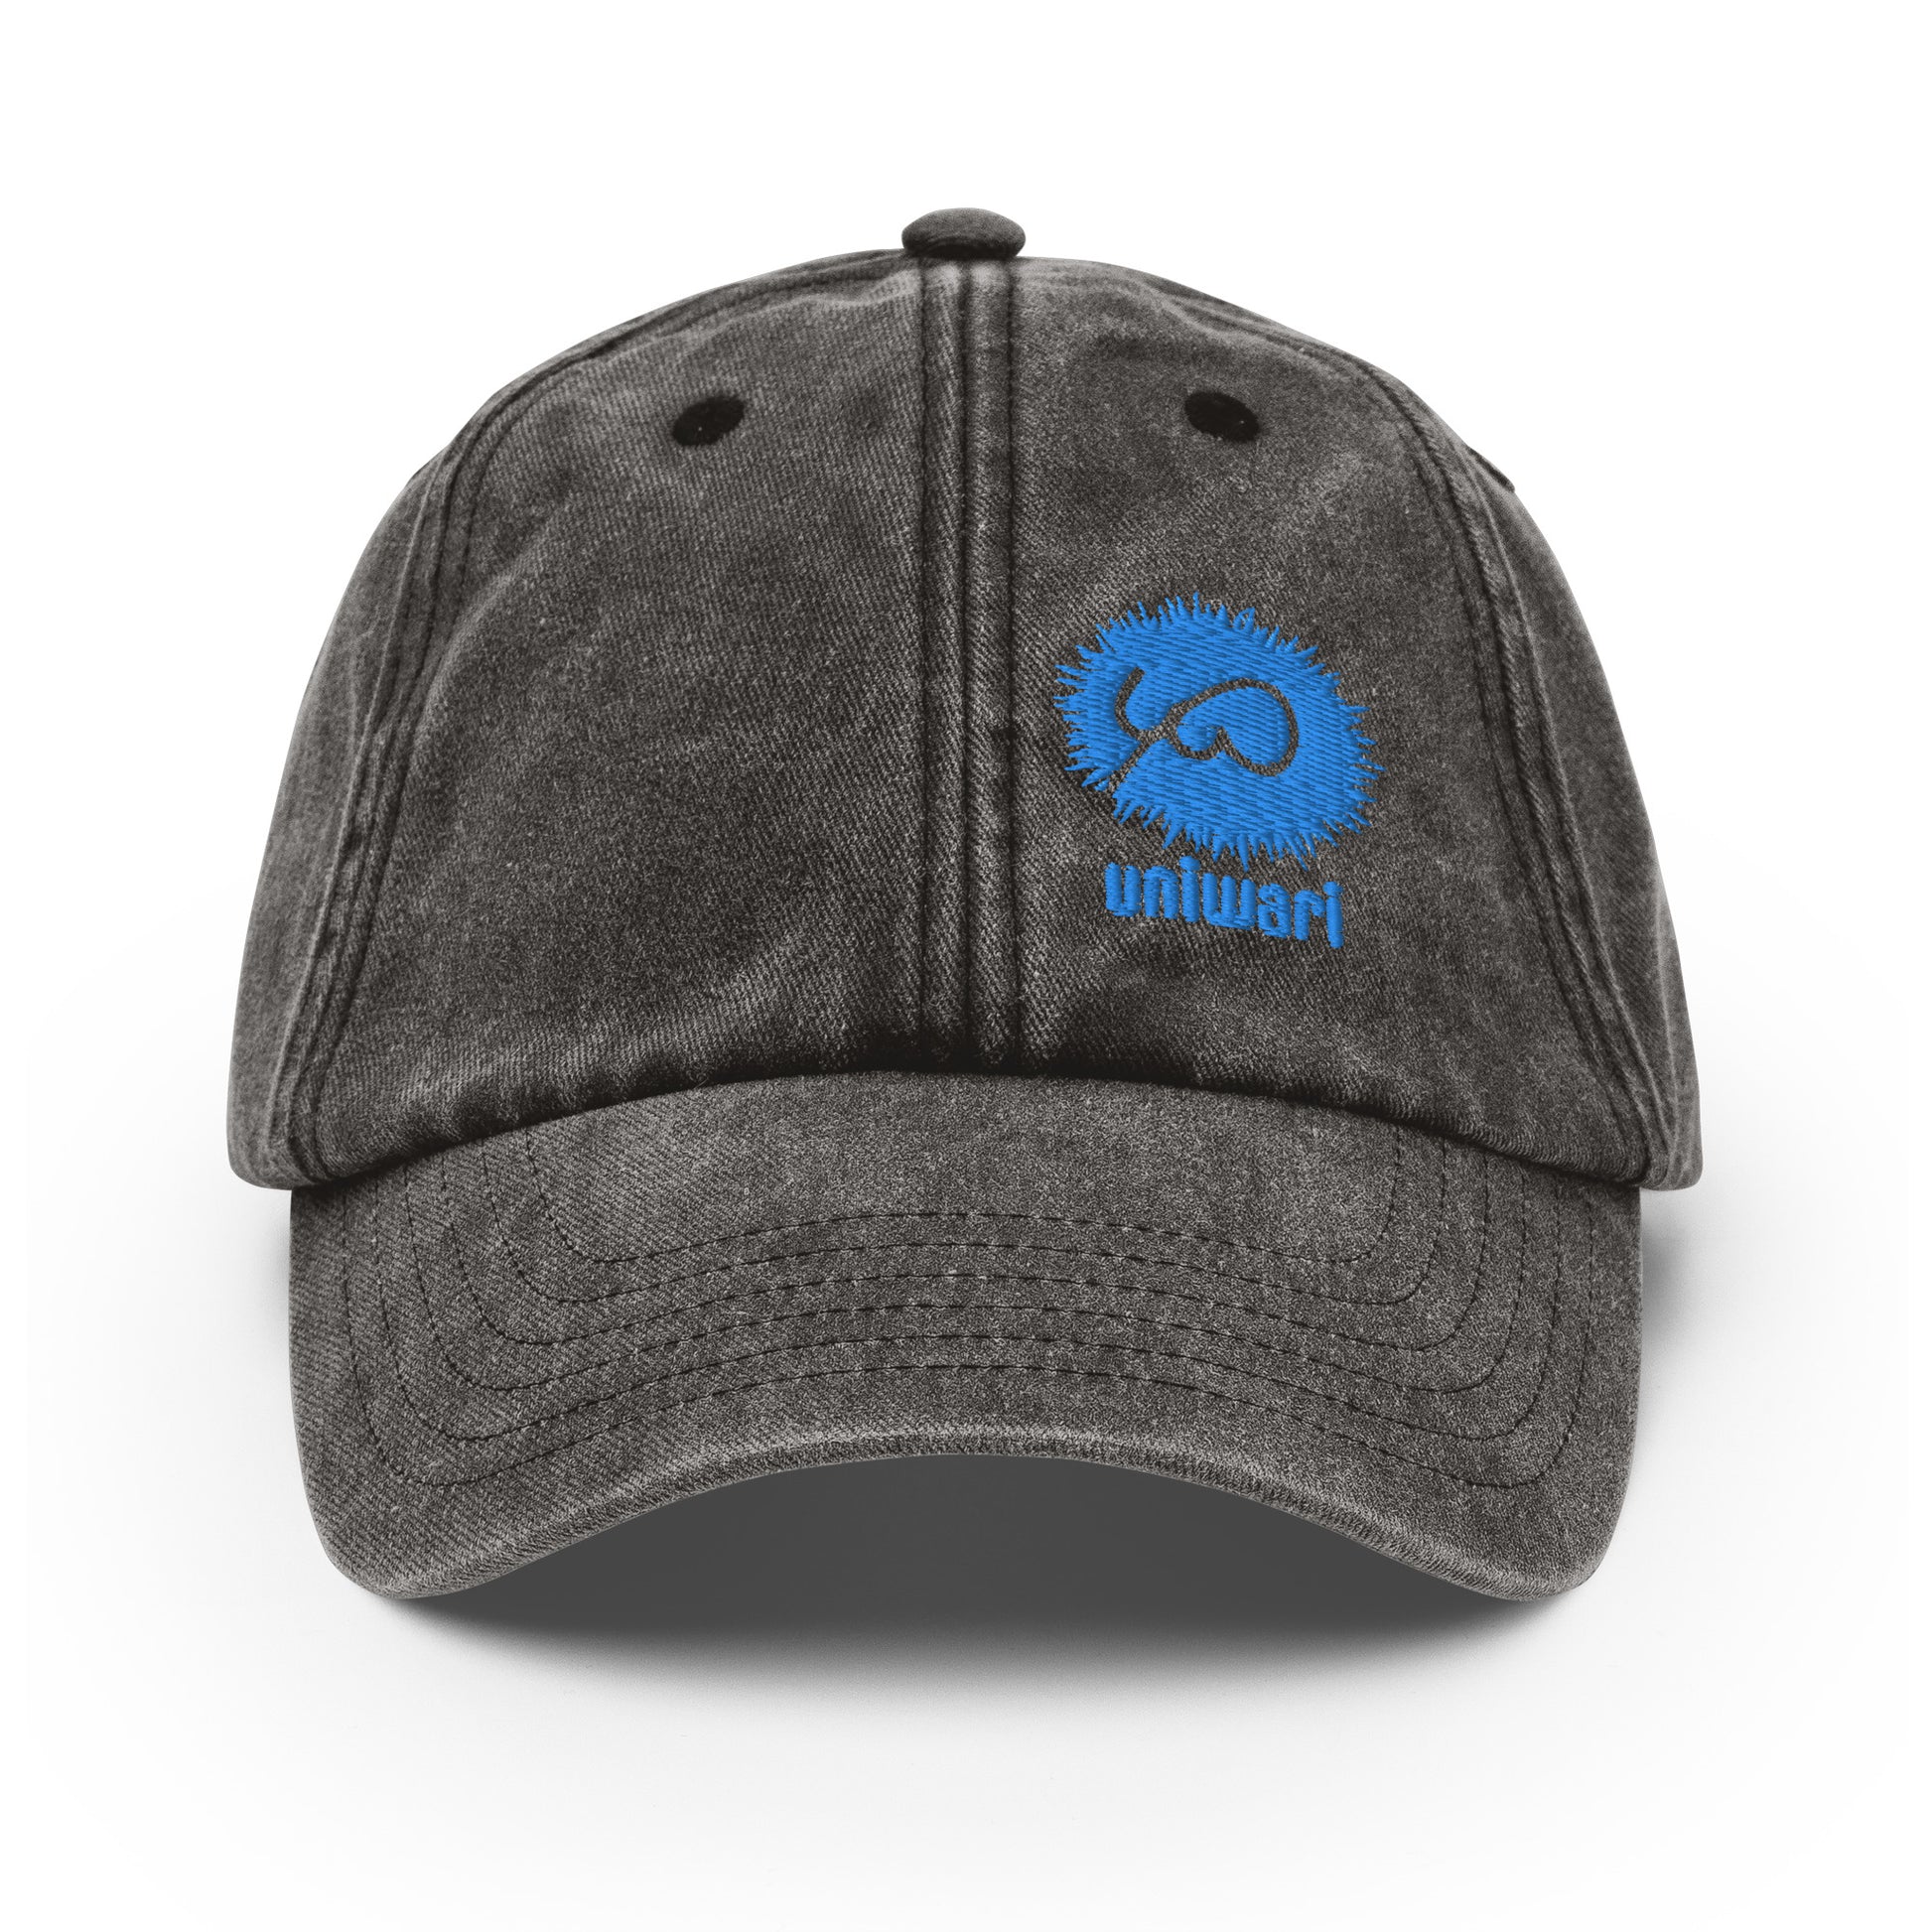 Black Cap- Front Design with an Blue Embroidery of Uniwari Logo